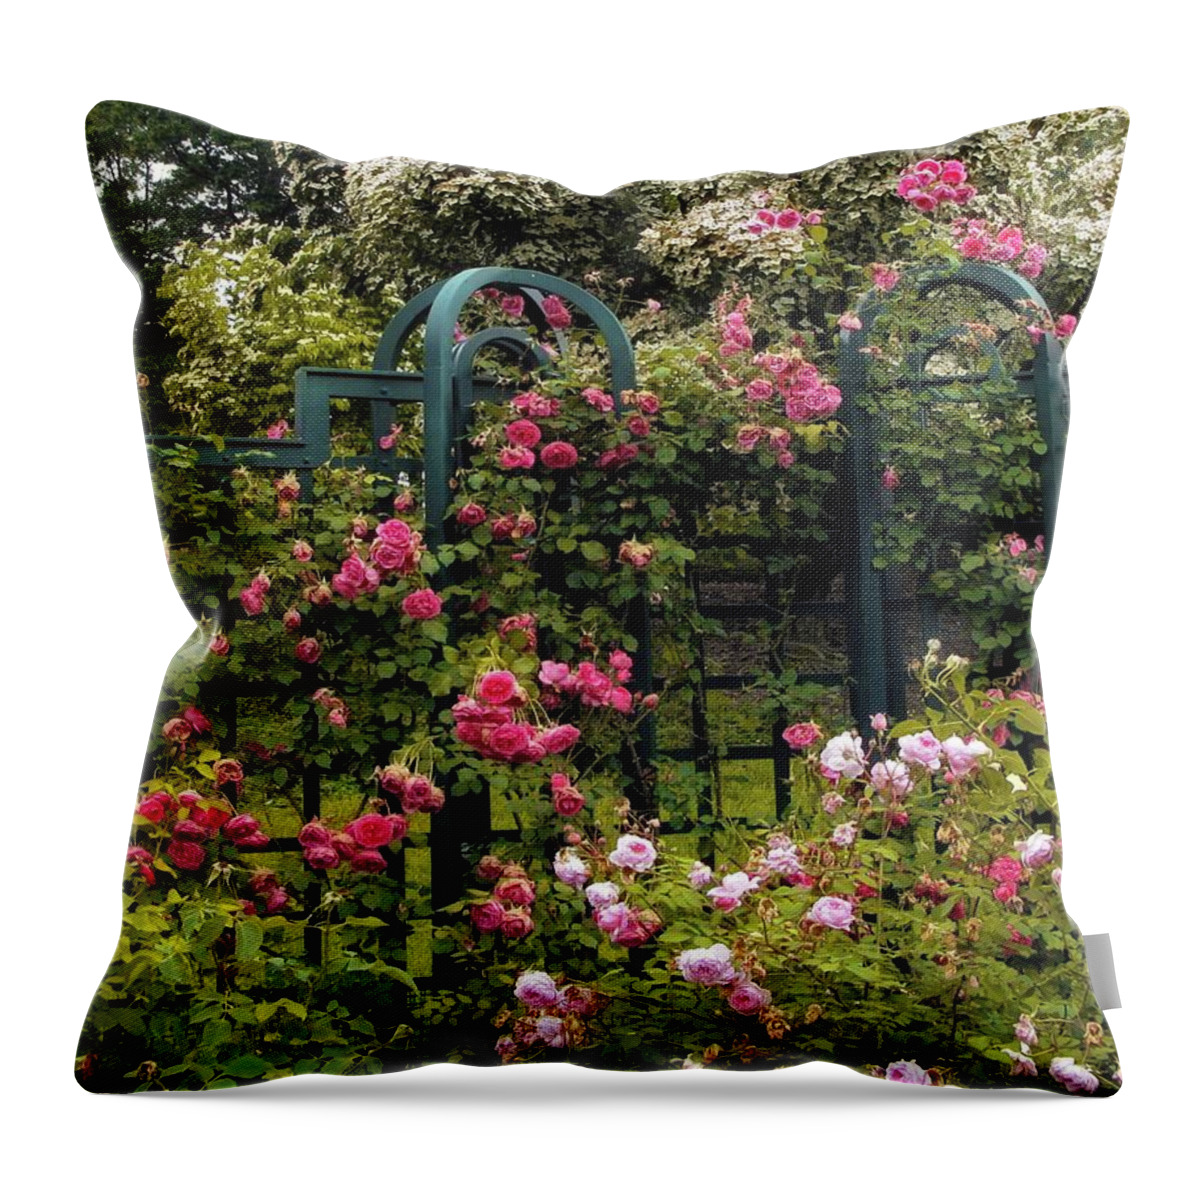 Nature Throw Pillow featuring the photograph Rose Trellis by Jessica Jenney